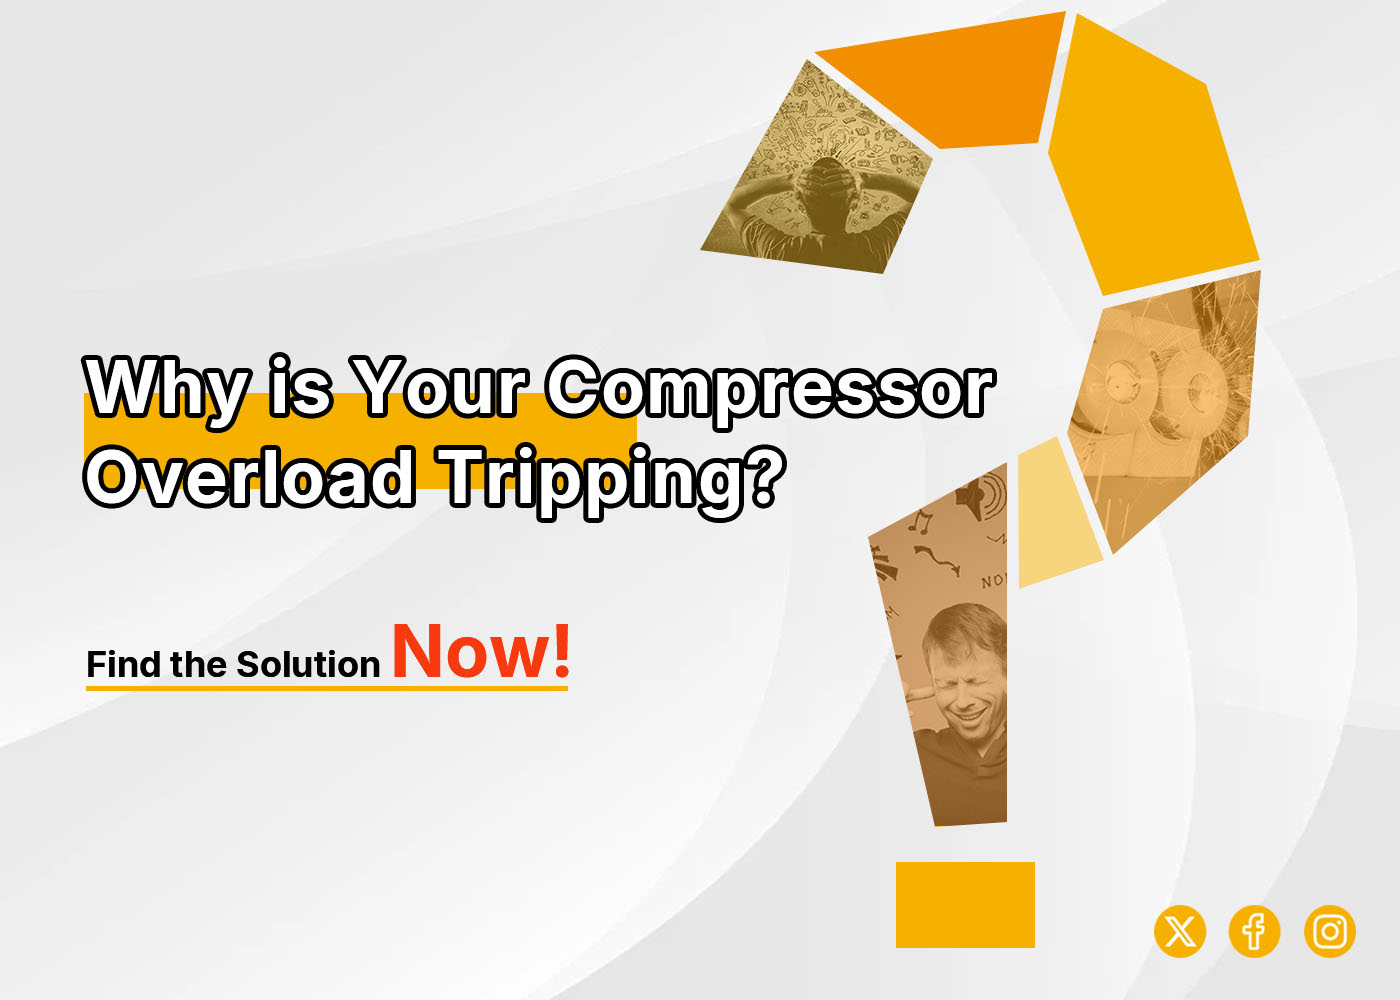 Why is Your Compressor Overload Tripping